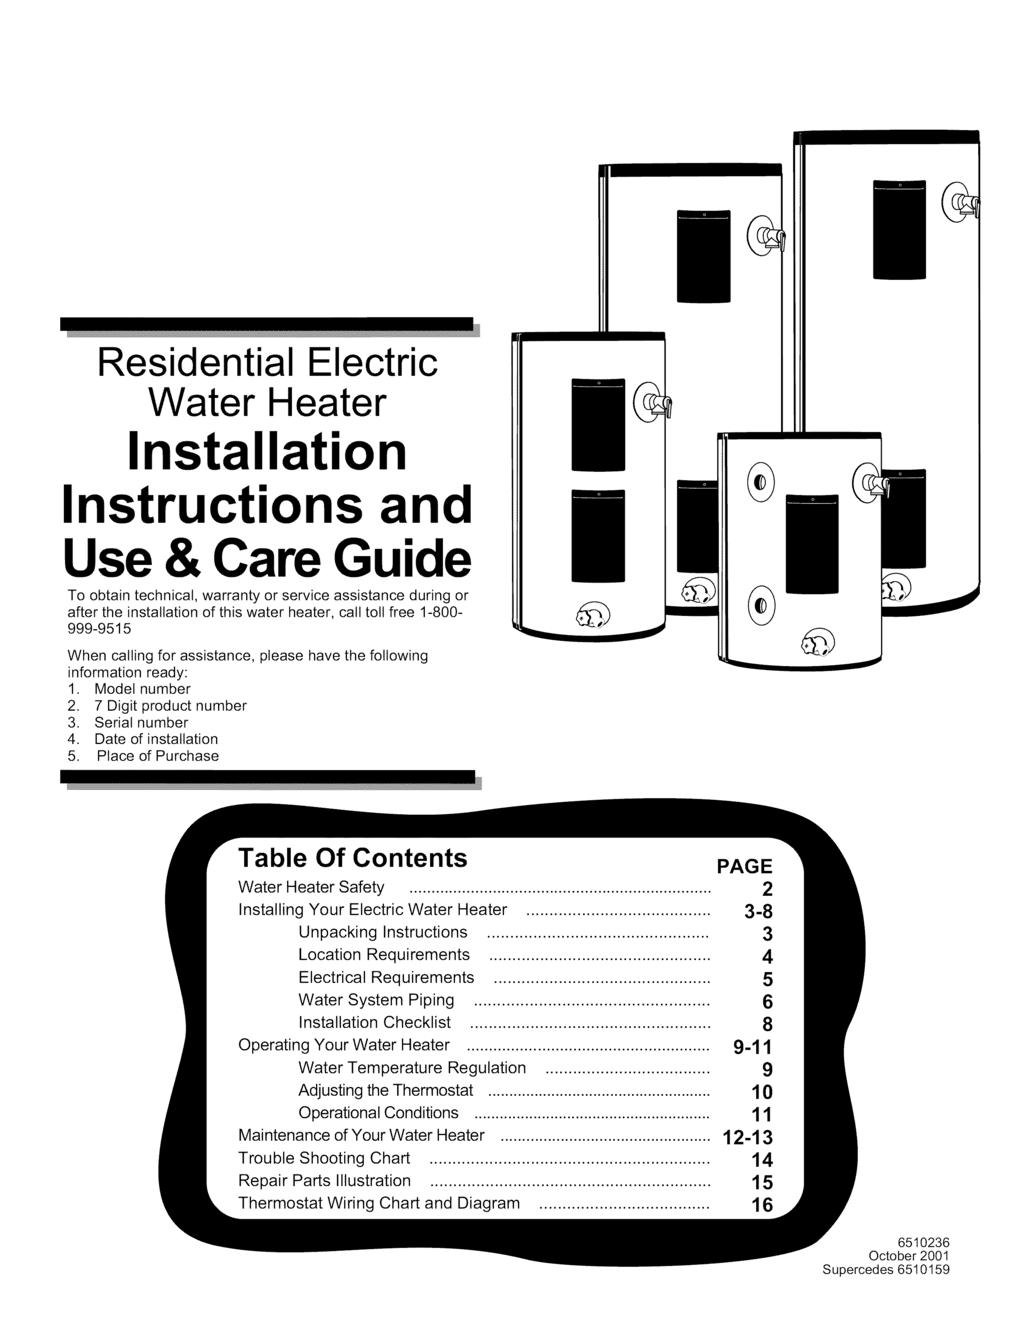 Residential Electric Water Heater Installation Instructions and Use & Care Guide To obtain technical, warranty or service assistance during or after the installation of this water heater, call toll